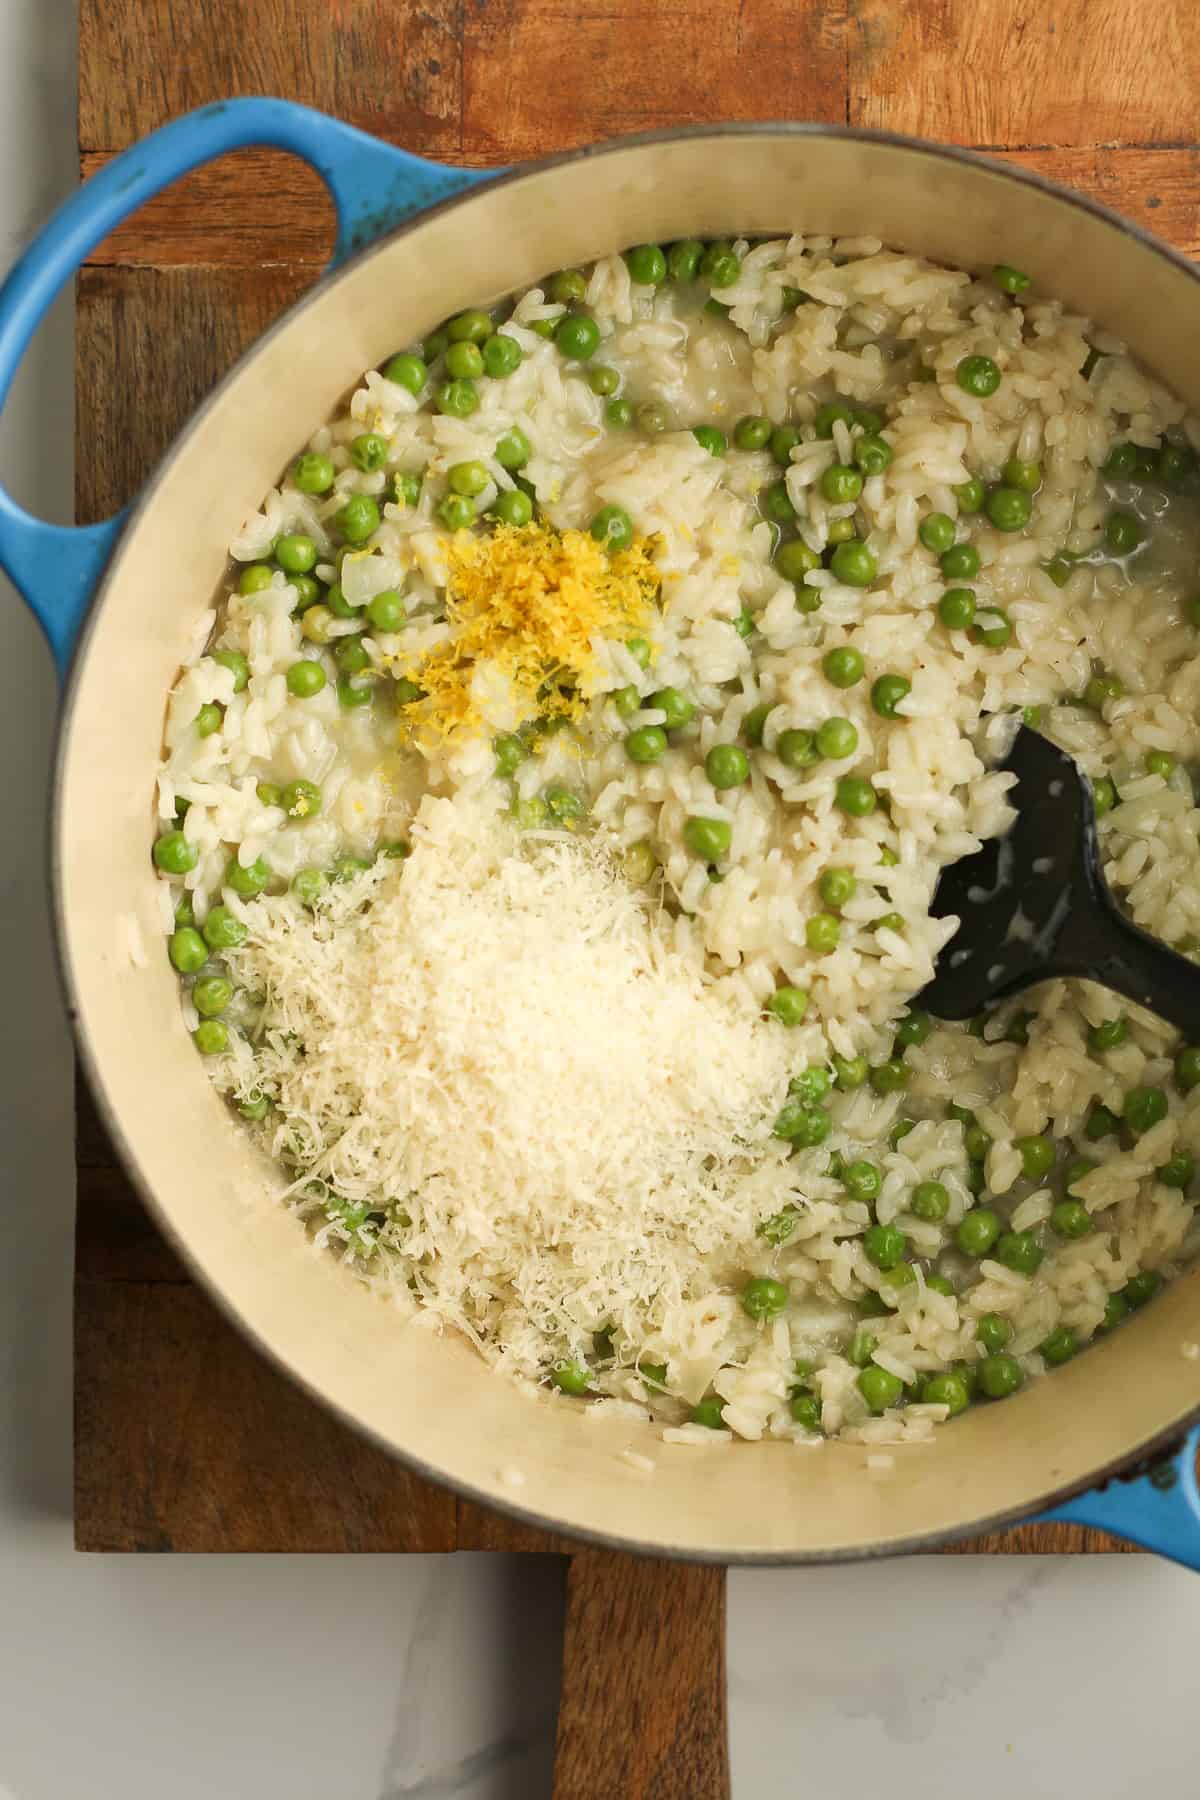 A stock pot of risotto with peas, parmesan cheese, and lemon zest on top.